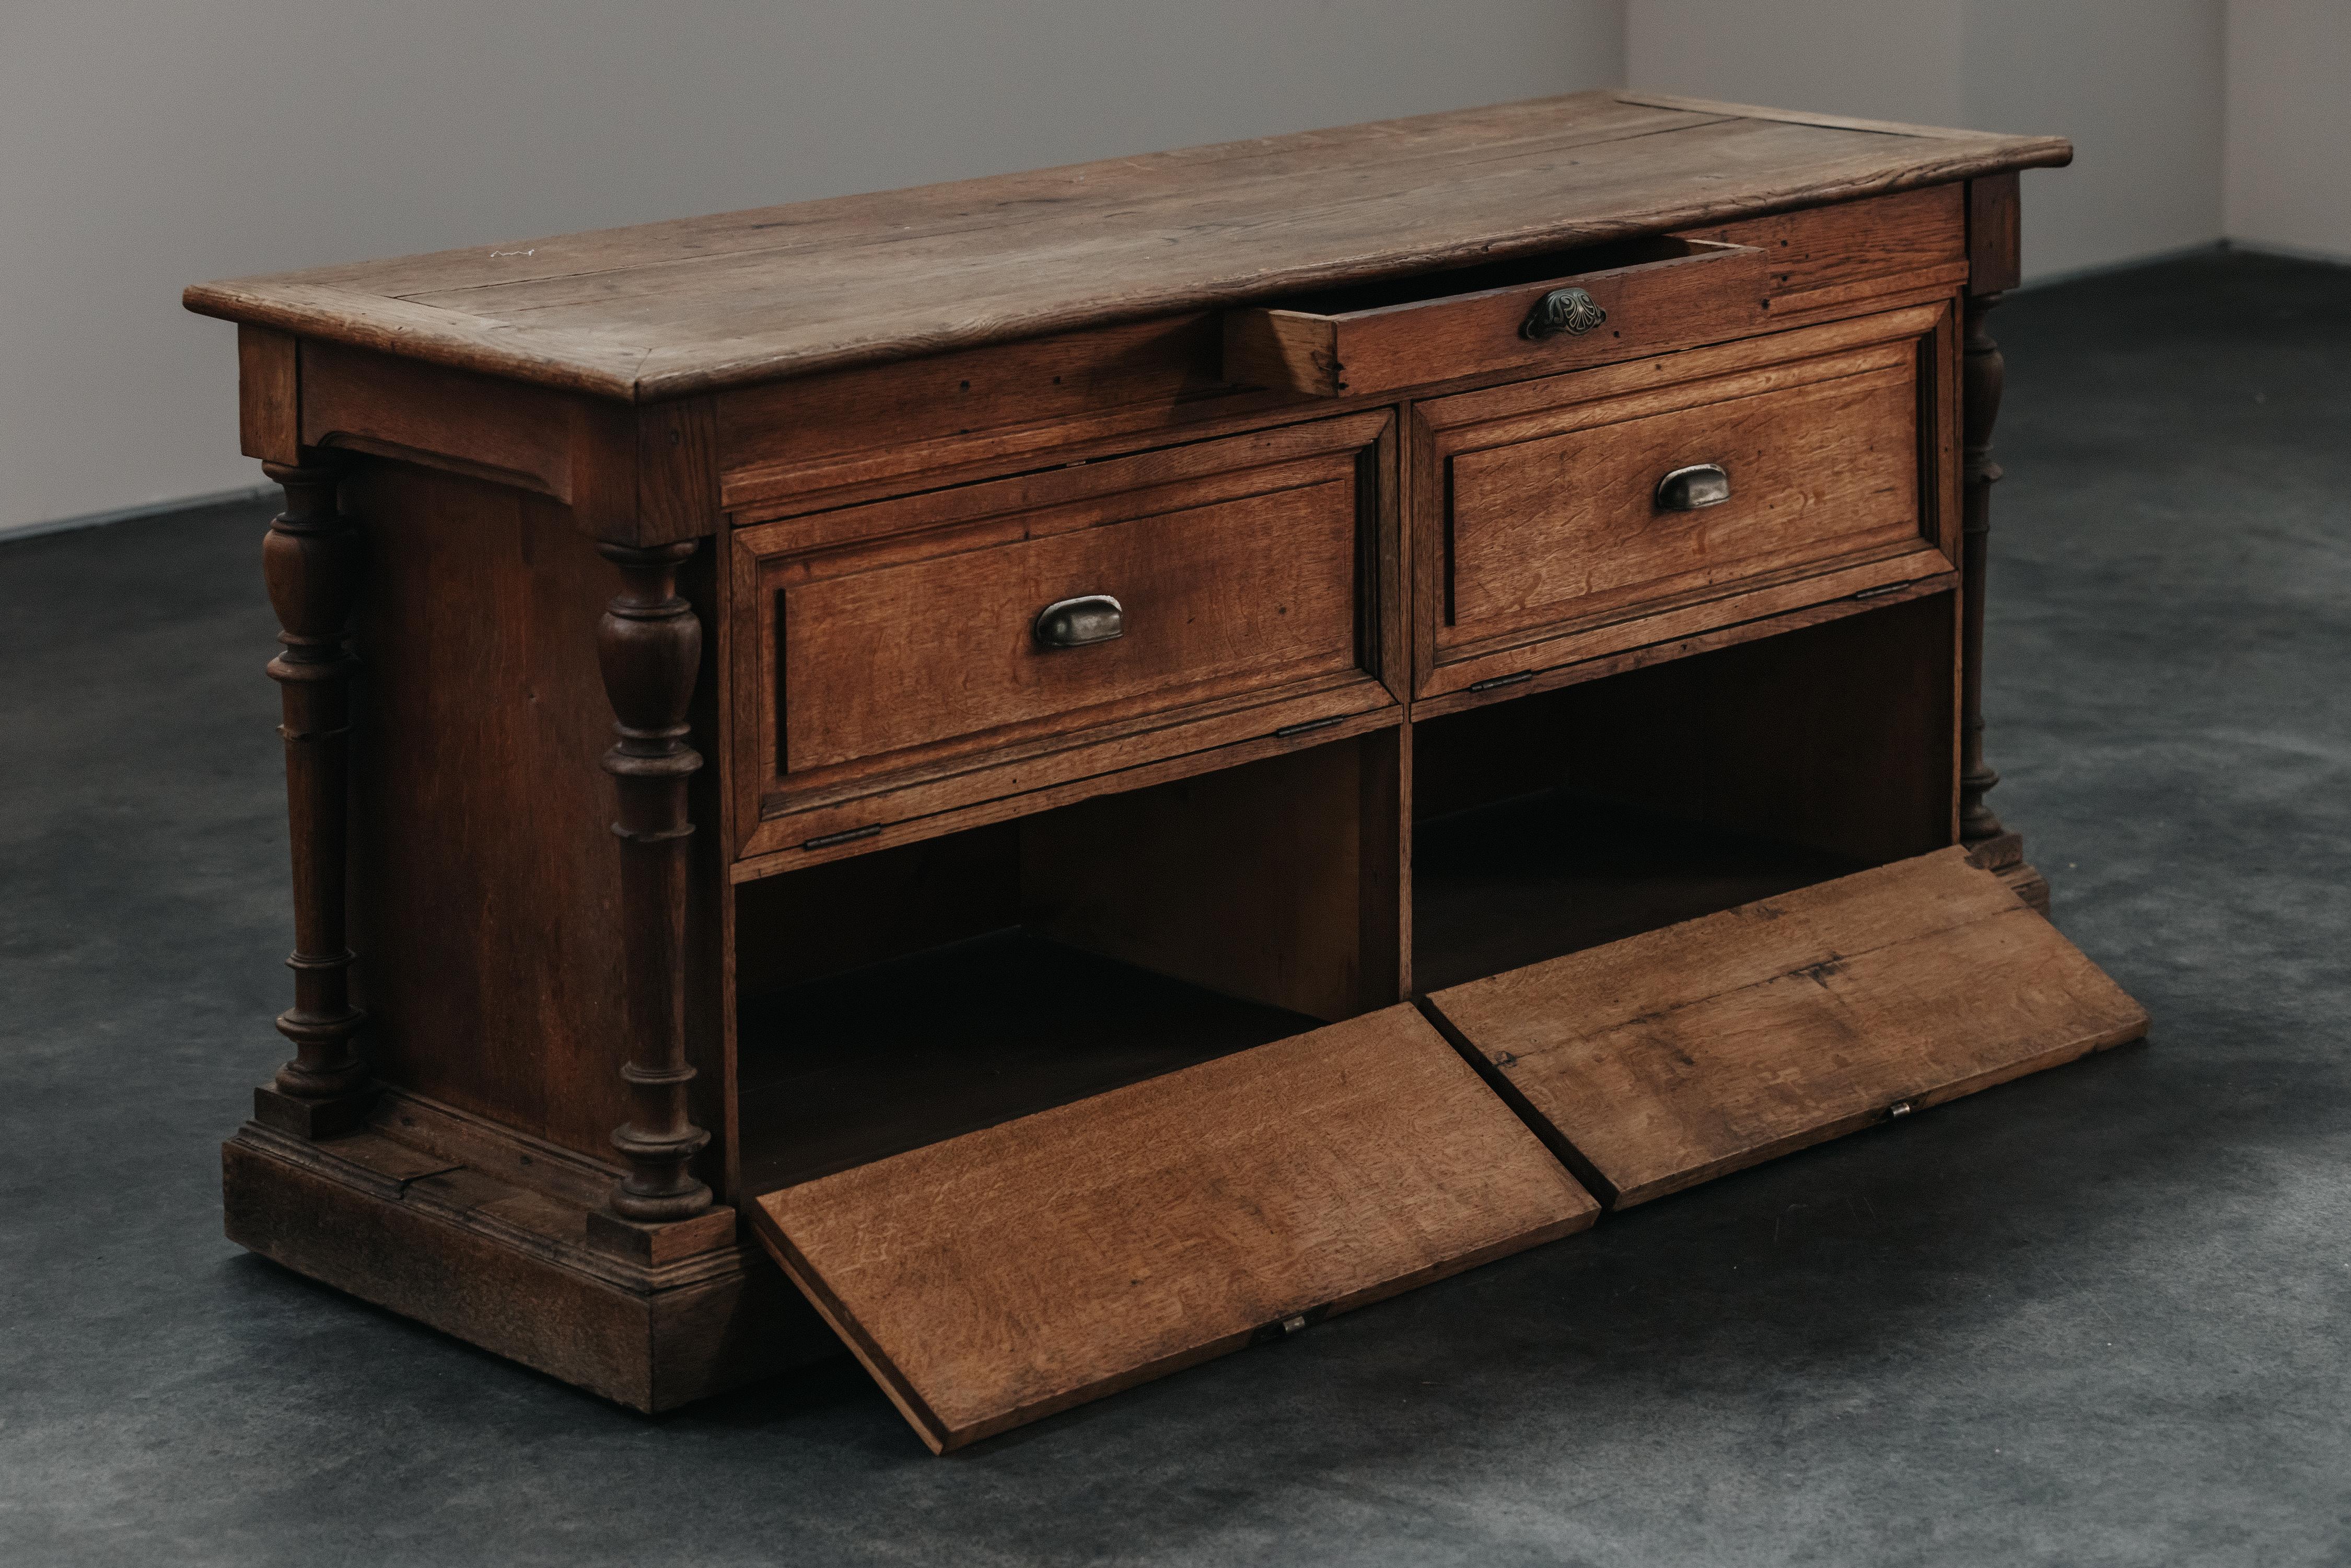 European Early Double Sided Shop Counter From France, Circa 1900